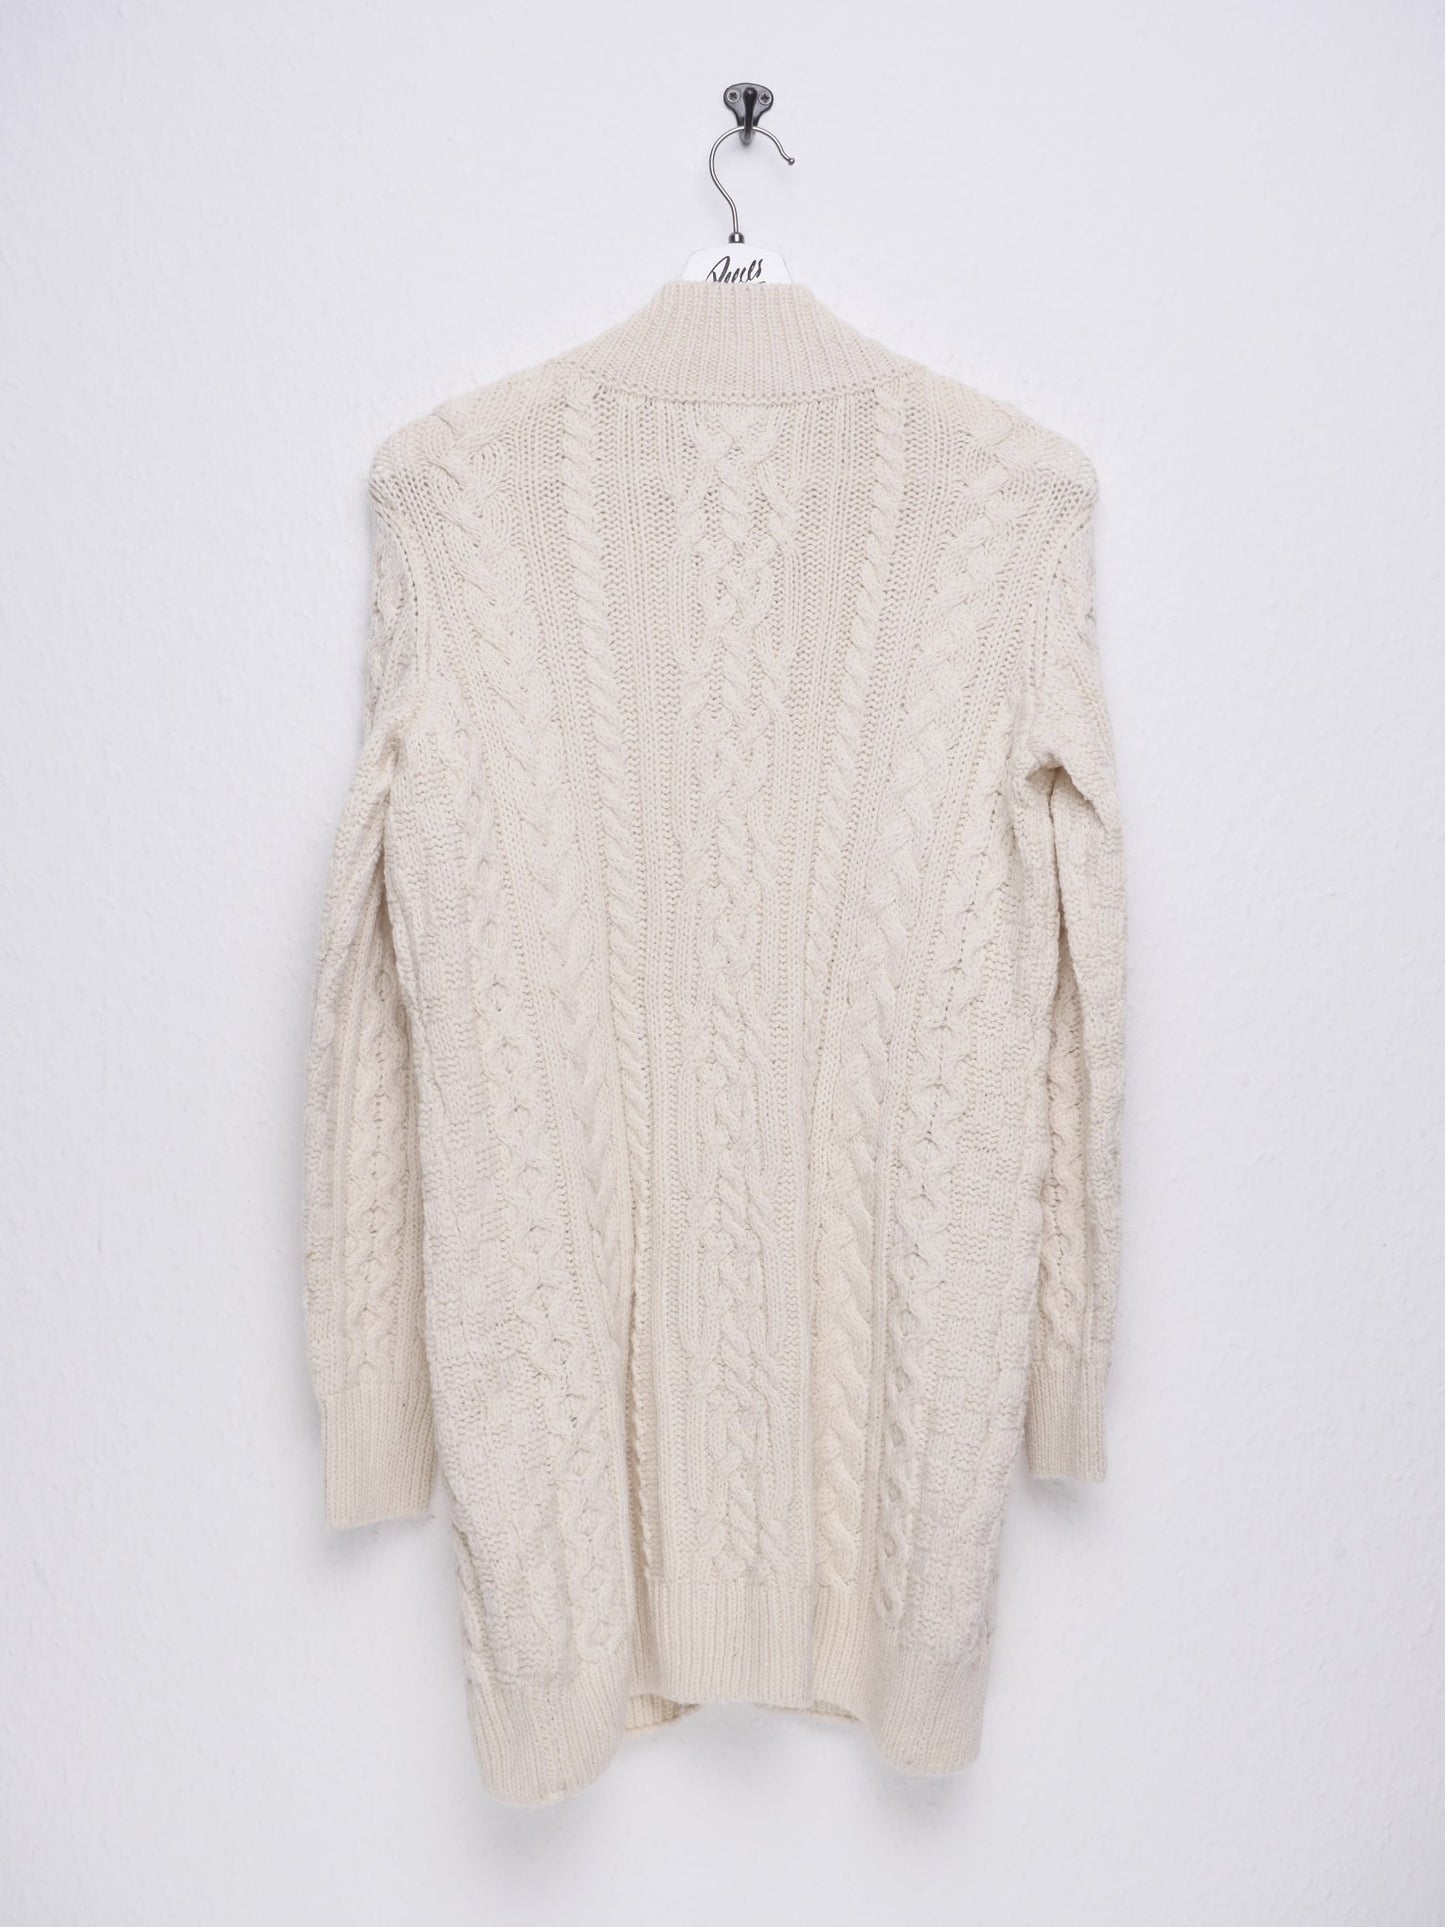 L.L.Bean knitted white Vintage Cardigan Sweater - Peeces